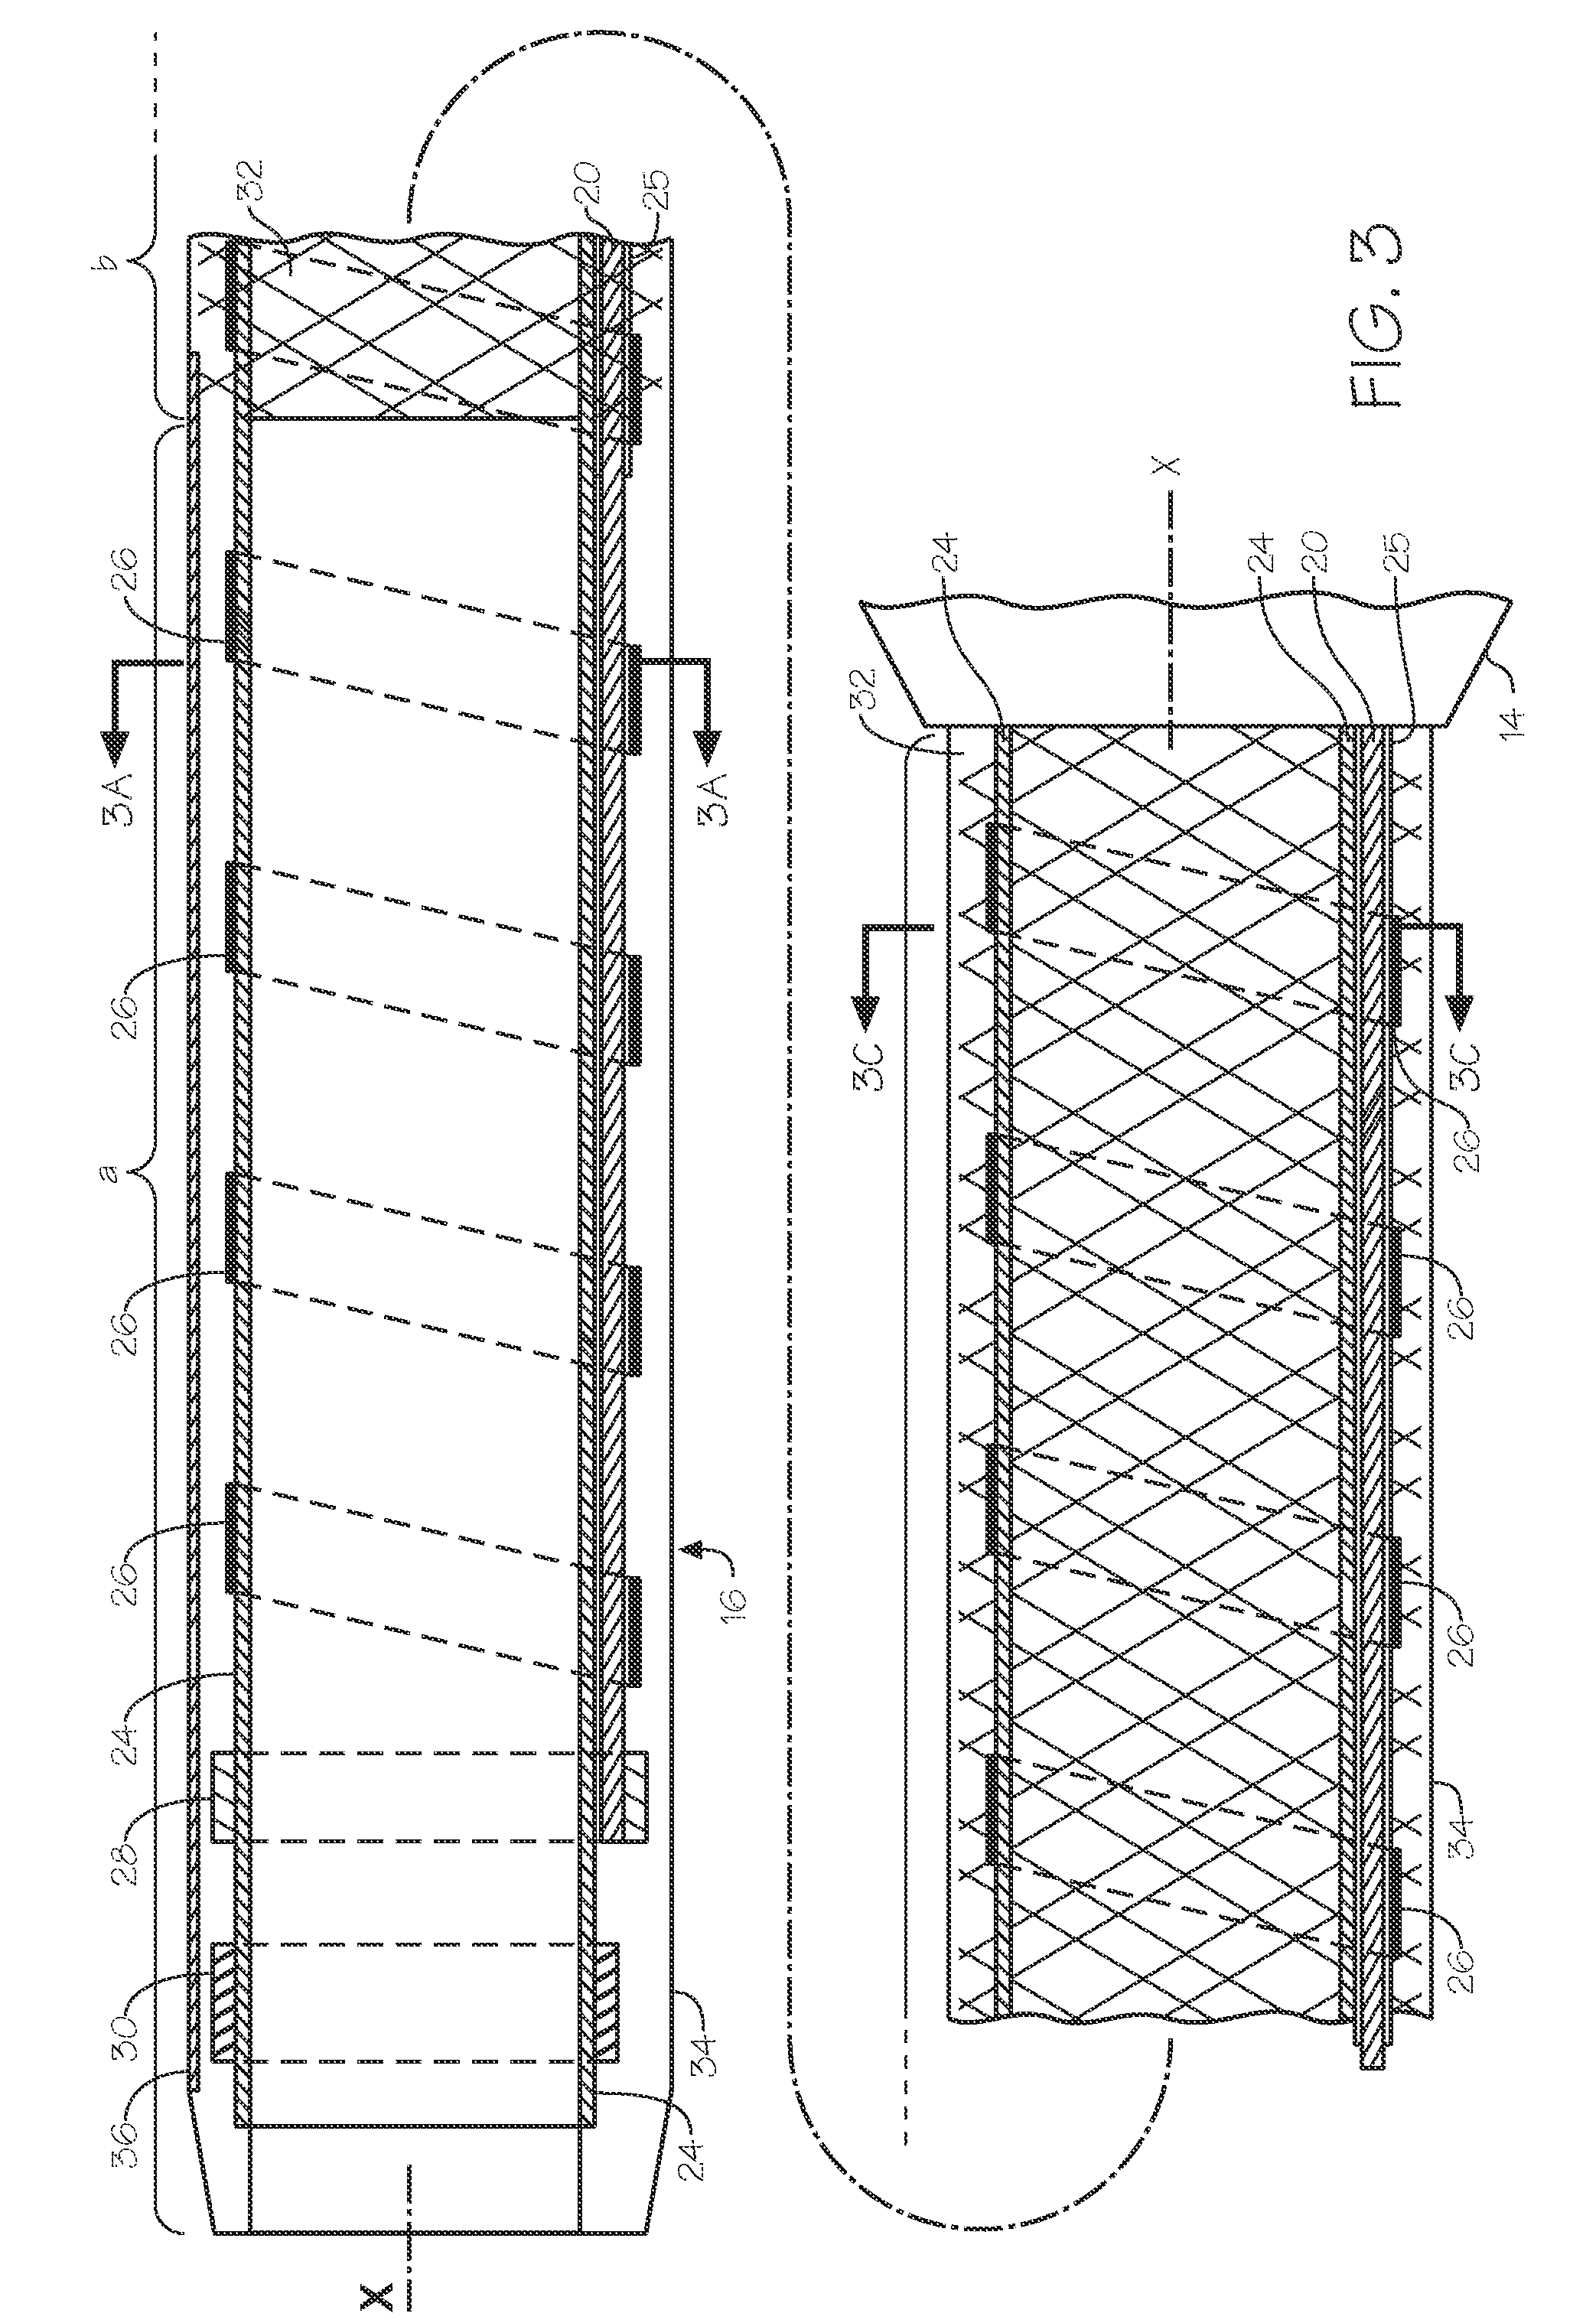 Steerable endoluminal devices and methods